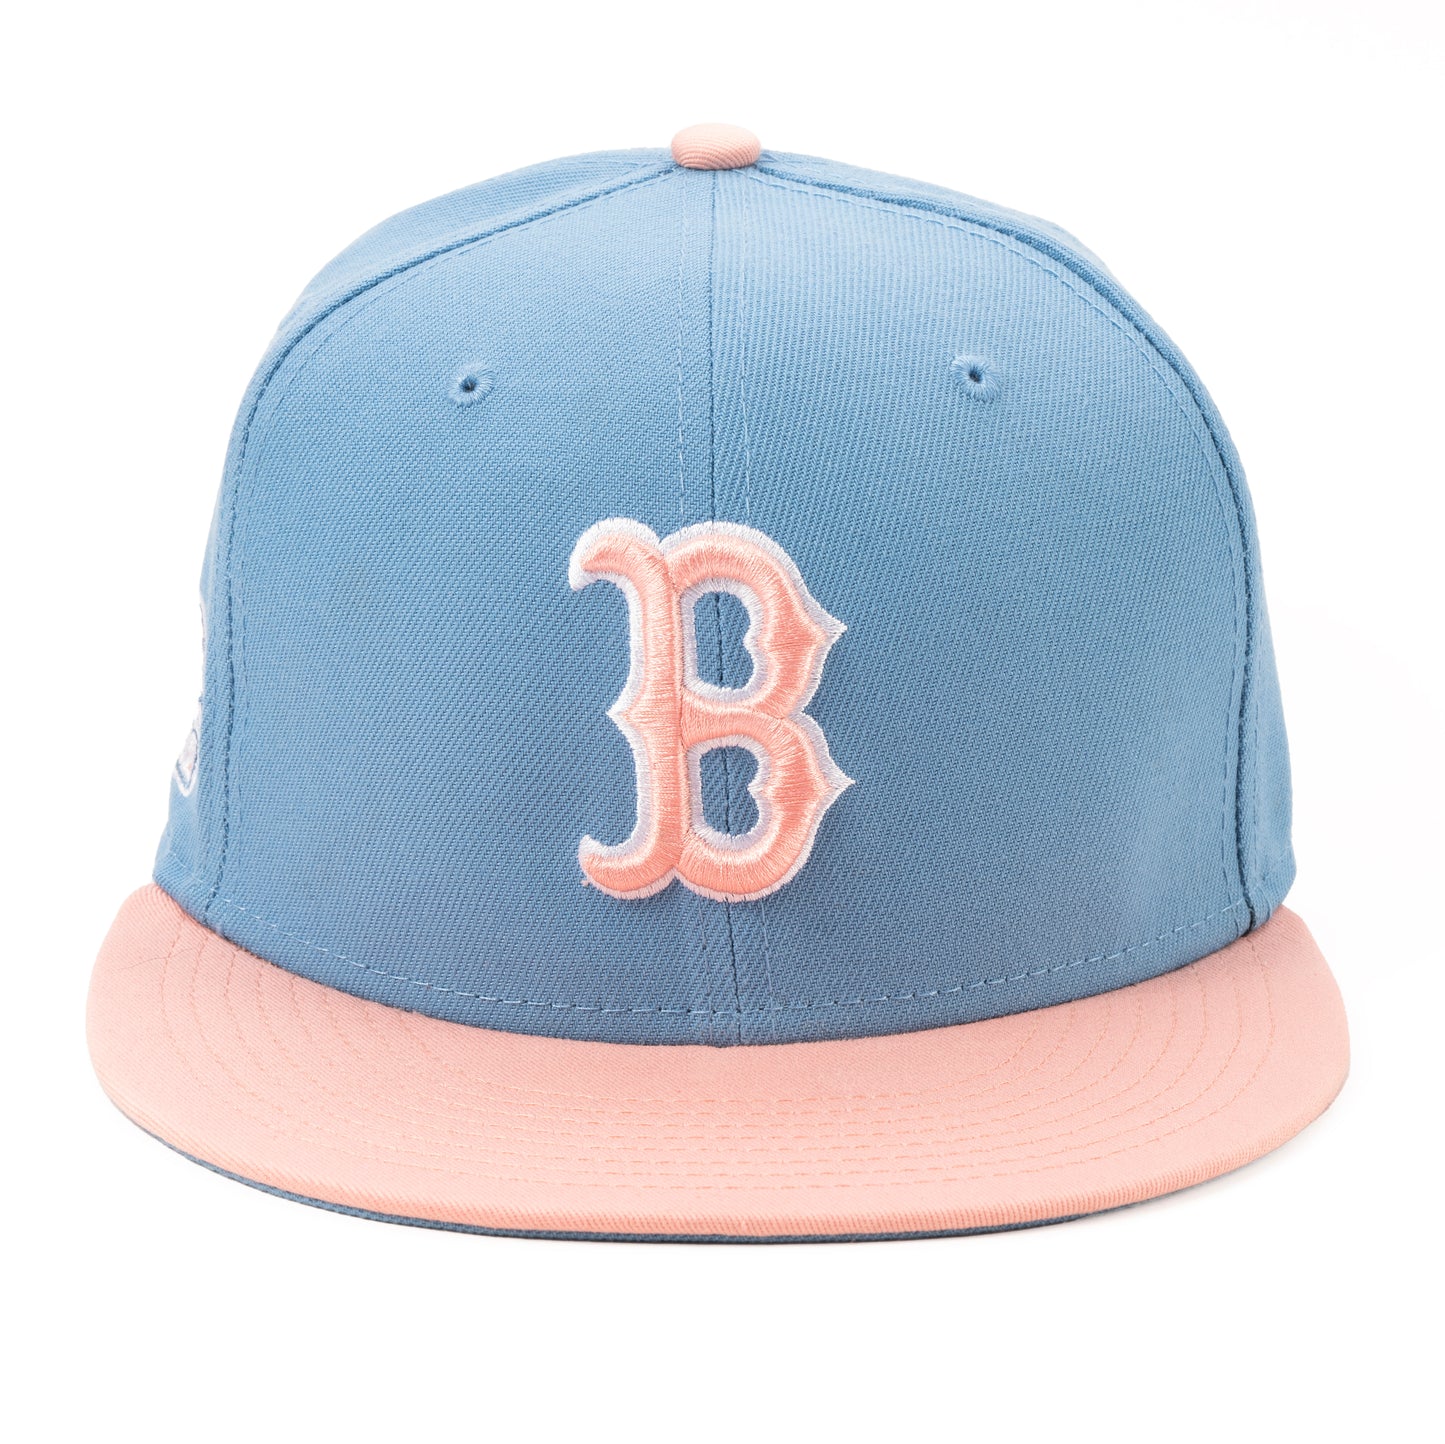 BOSTON RED SOX "MARSHMALLOW PACK" NEW ERA 59FIFTY HAT